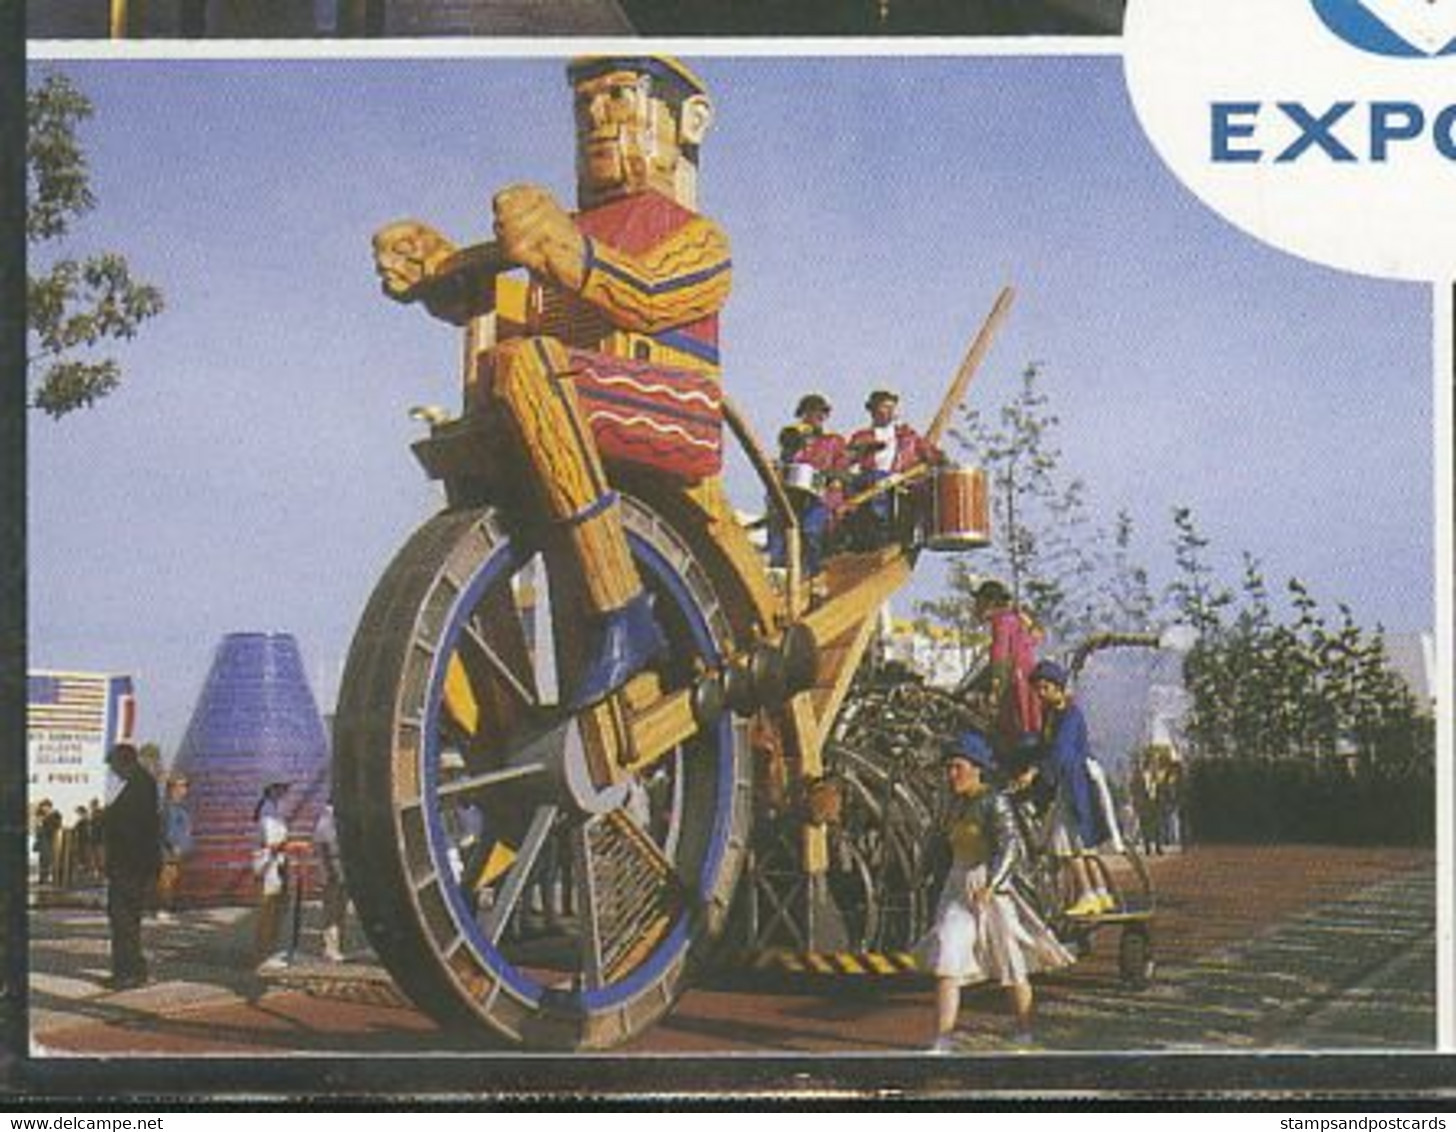 Portugal 1998 Entier Postal Expo 98 Vélo Cycle Jouet  Stationary Bicycle Cycle Toy - Vélo